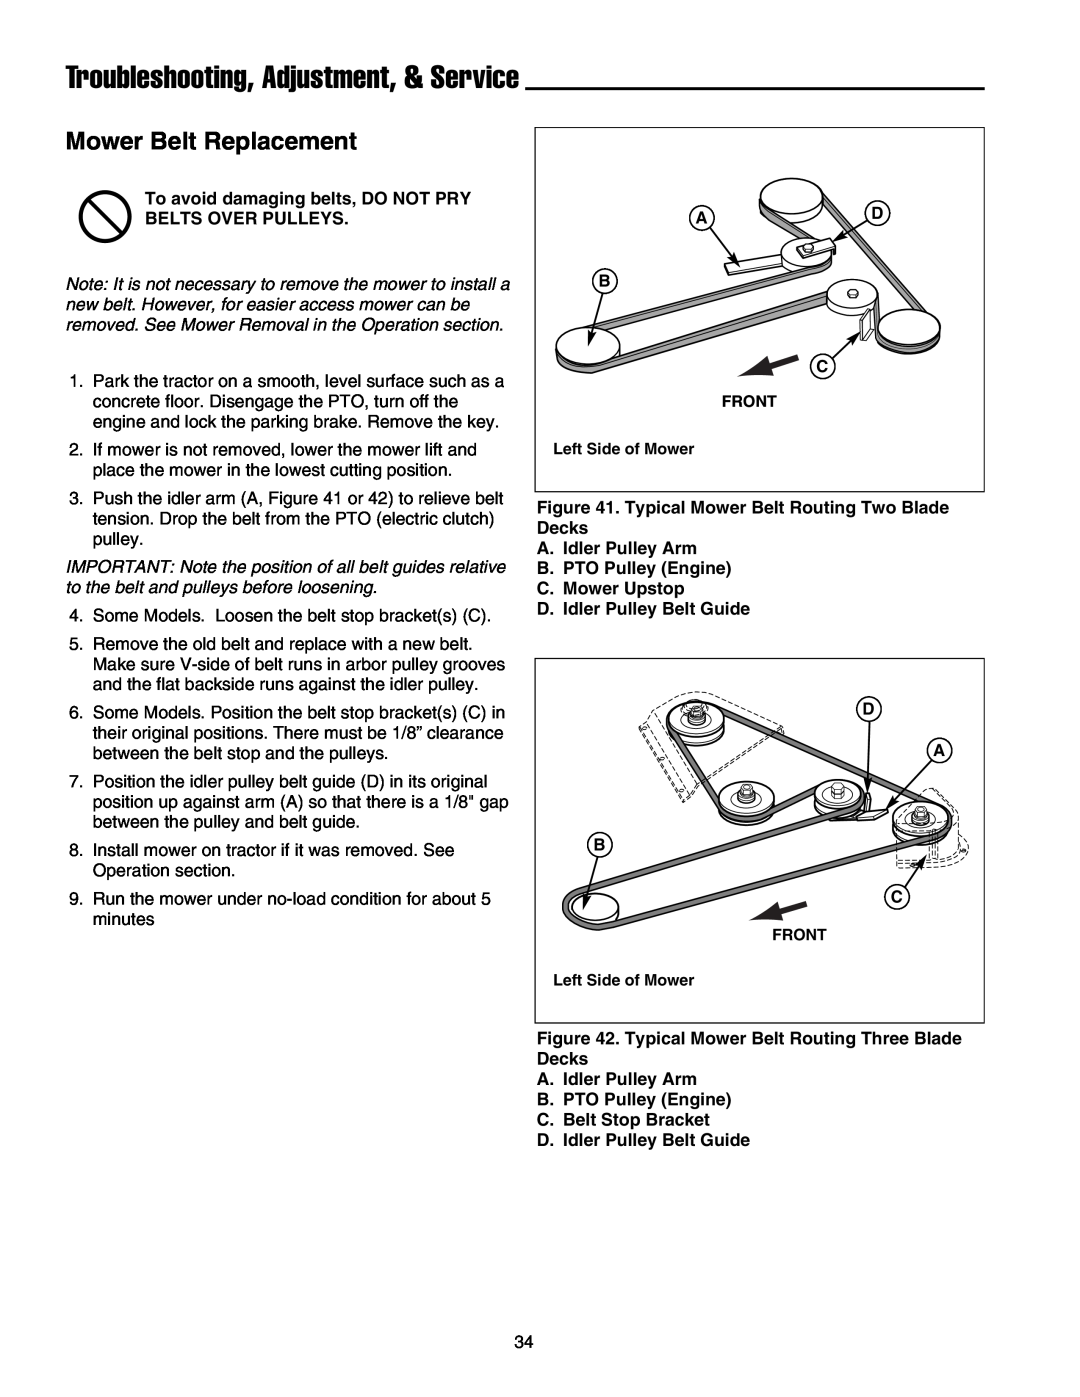 Snapper LT-200 Series manual Mower Belt Replacement, Troubleshooting, Adjustment, & Service 